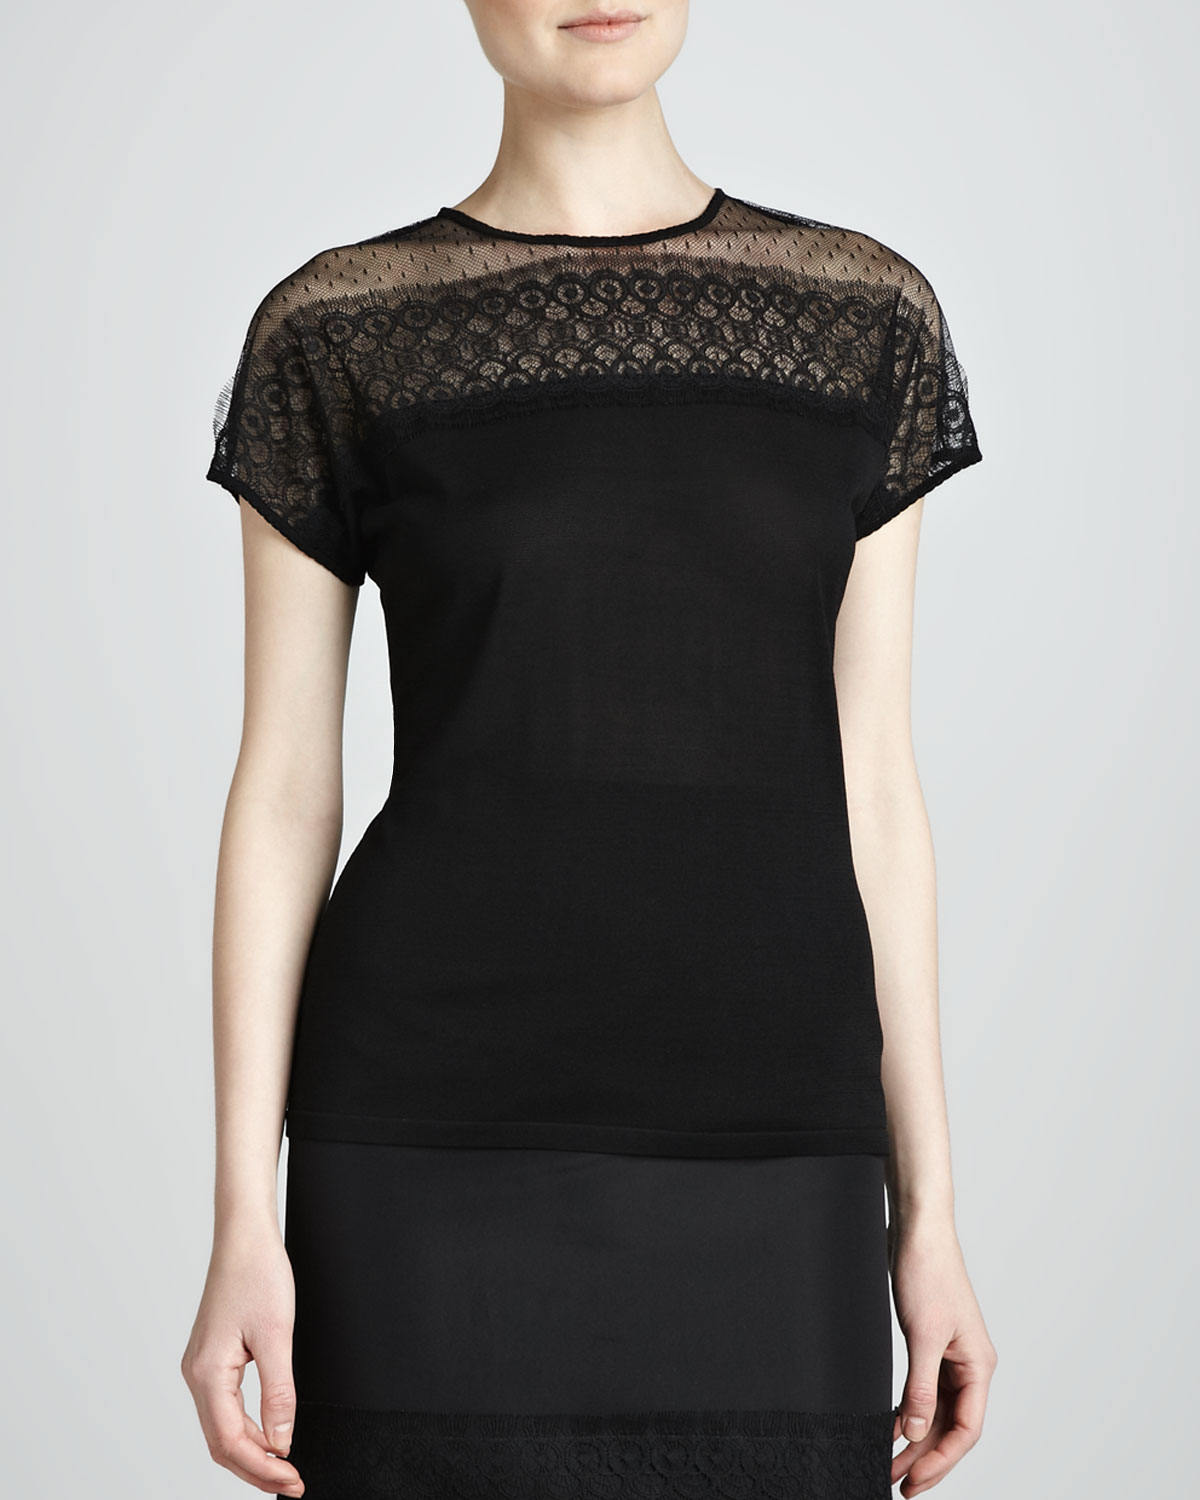 Carolina Herrera Knit Top with Lace Accent in Black | Lyst